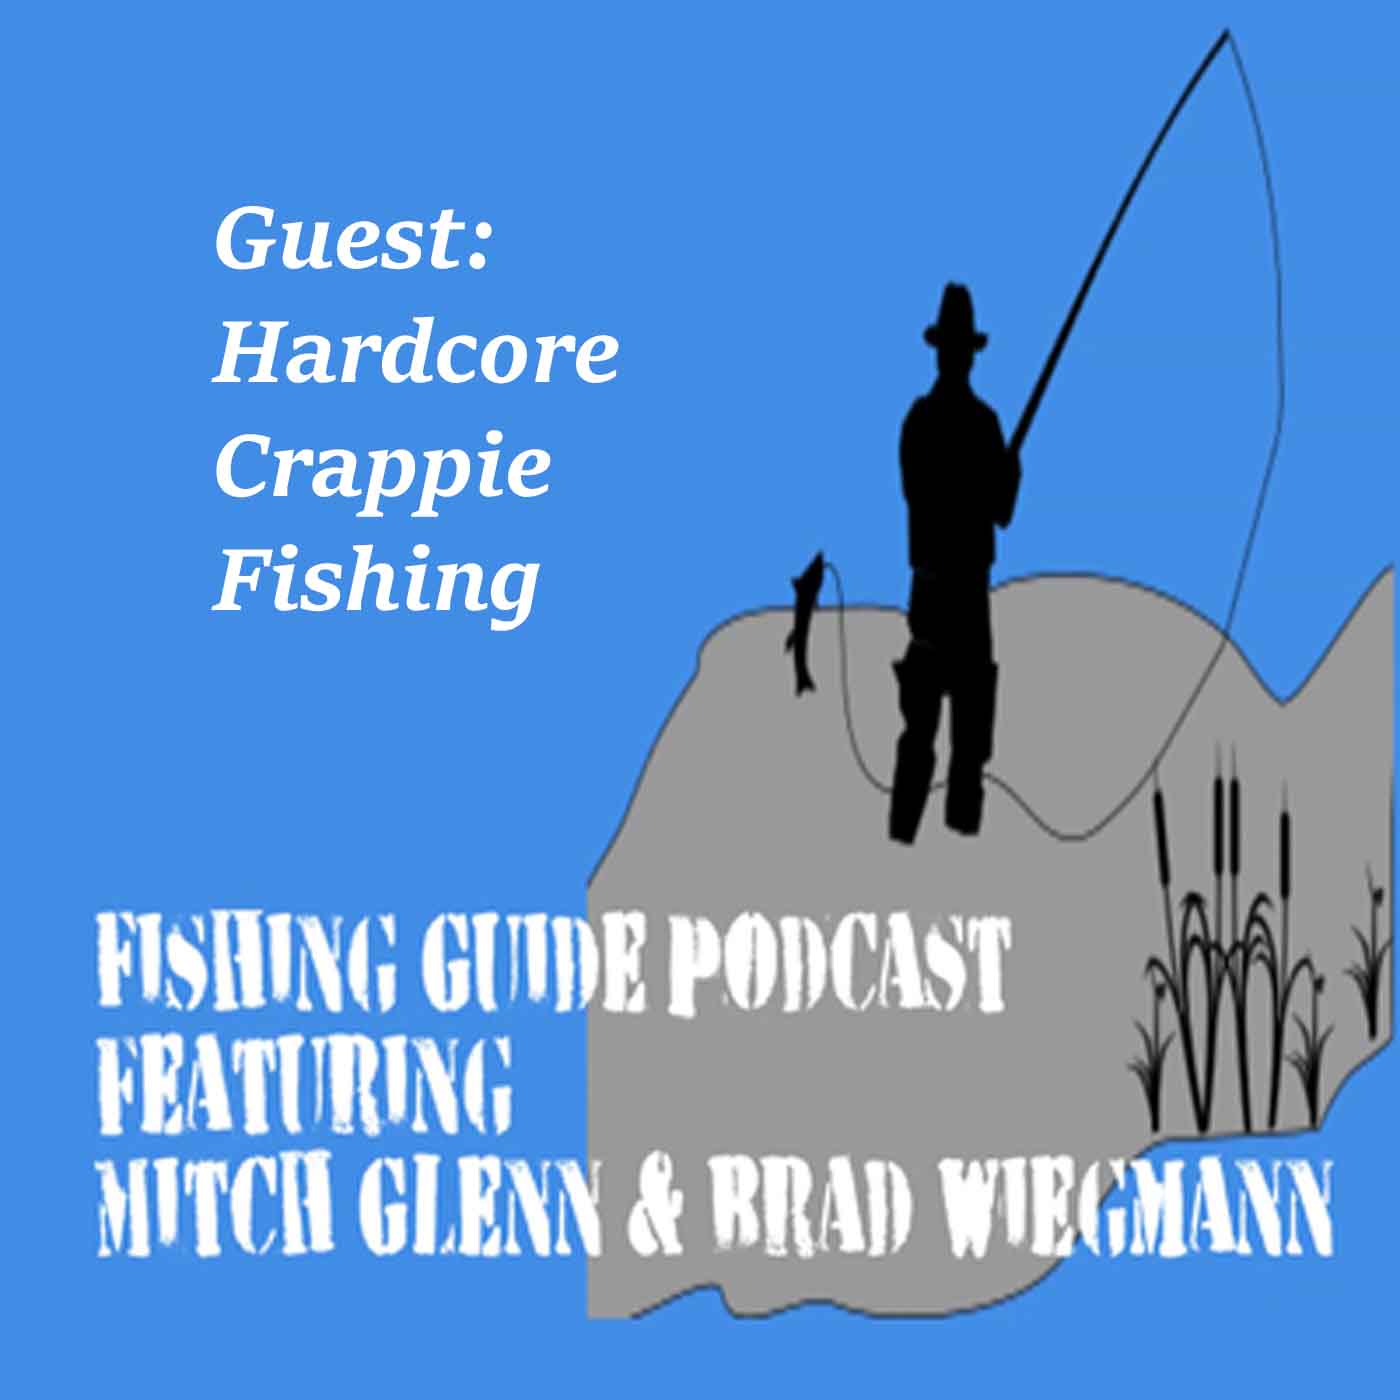 Hardcore Crappie Fishing team of fishing guides talk about fishing tackle and crappie catching techniques